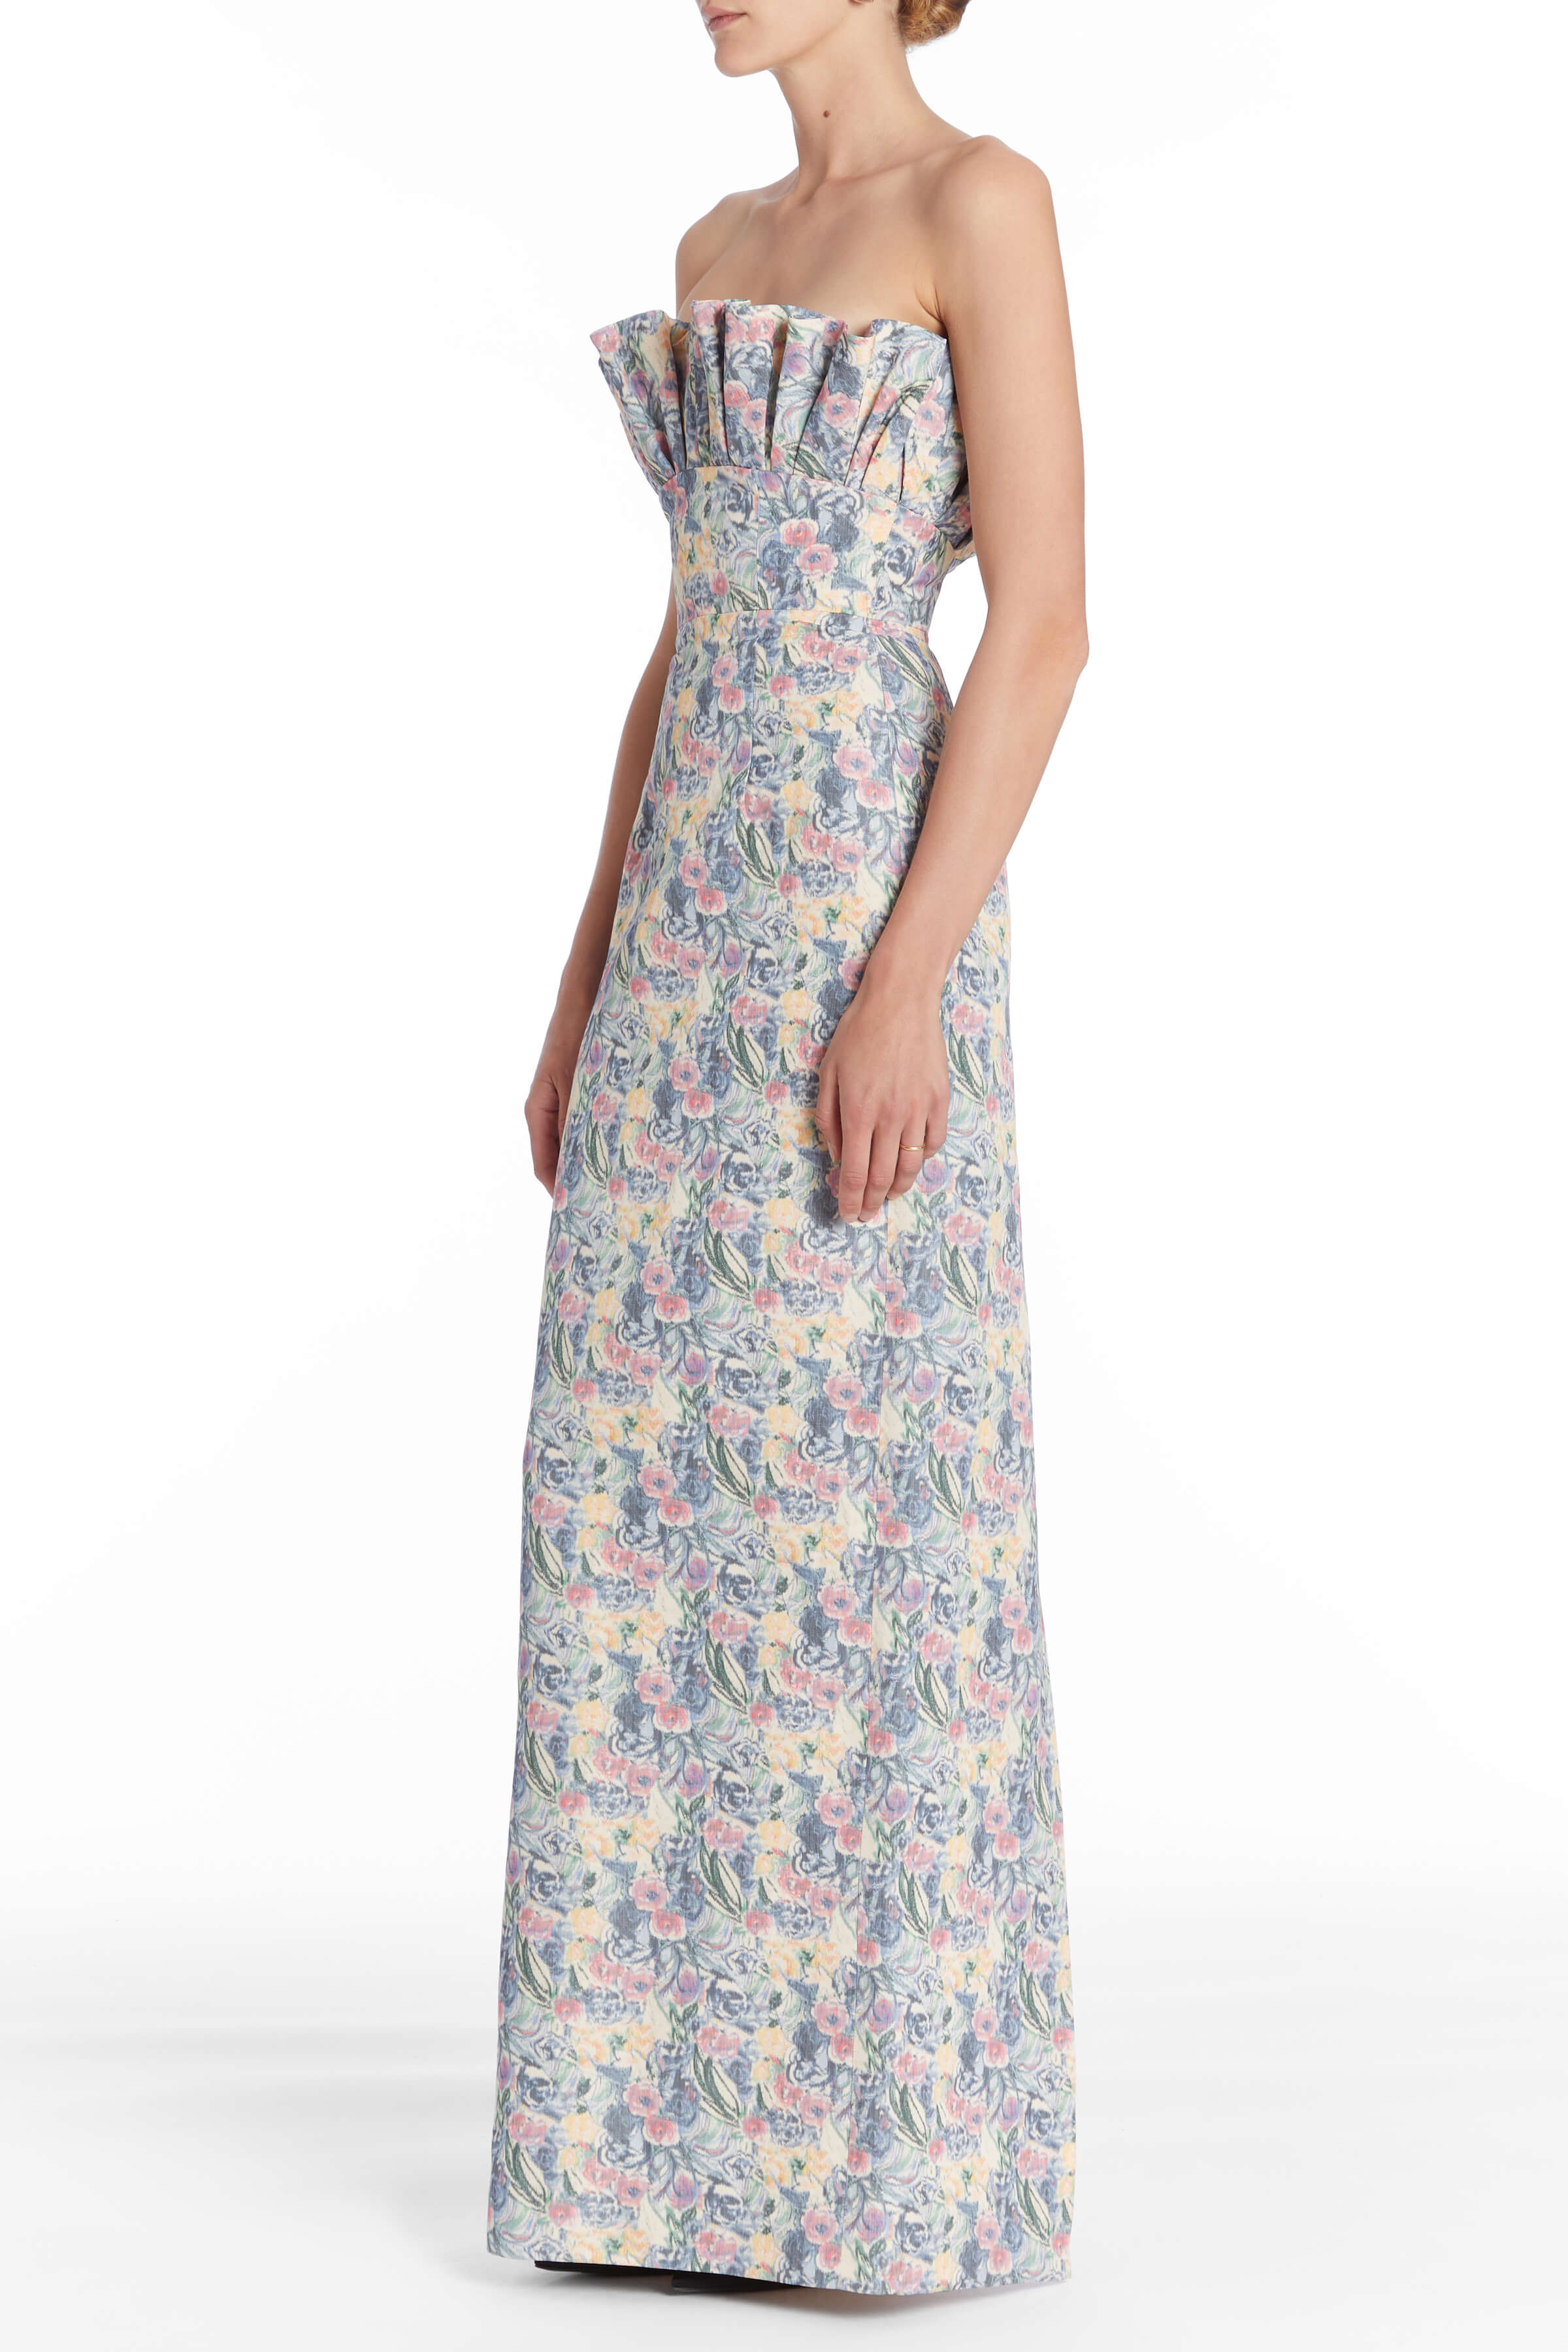 SALE: Demetra Floral Ruffled Bodice Gown